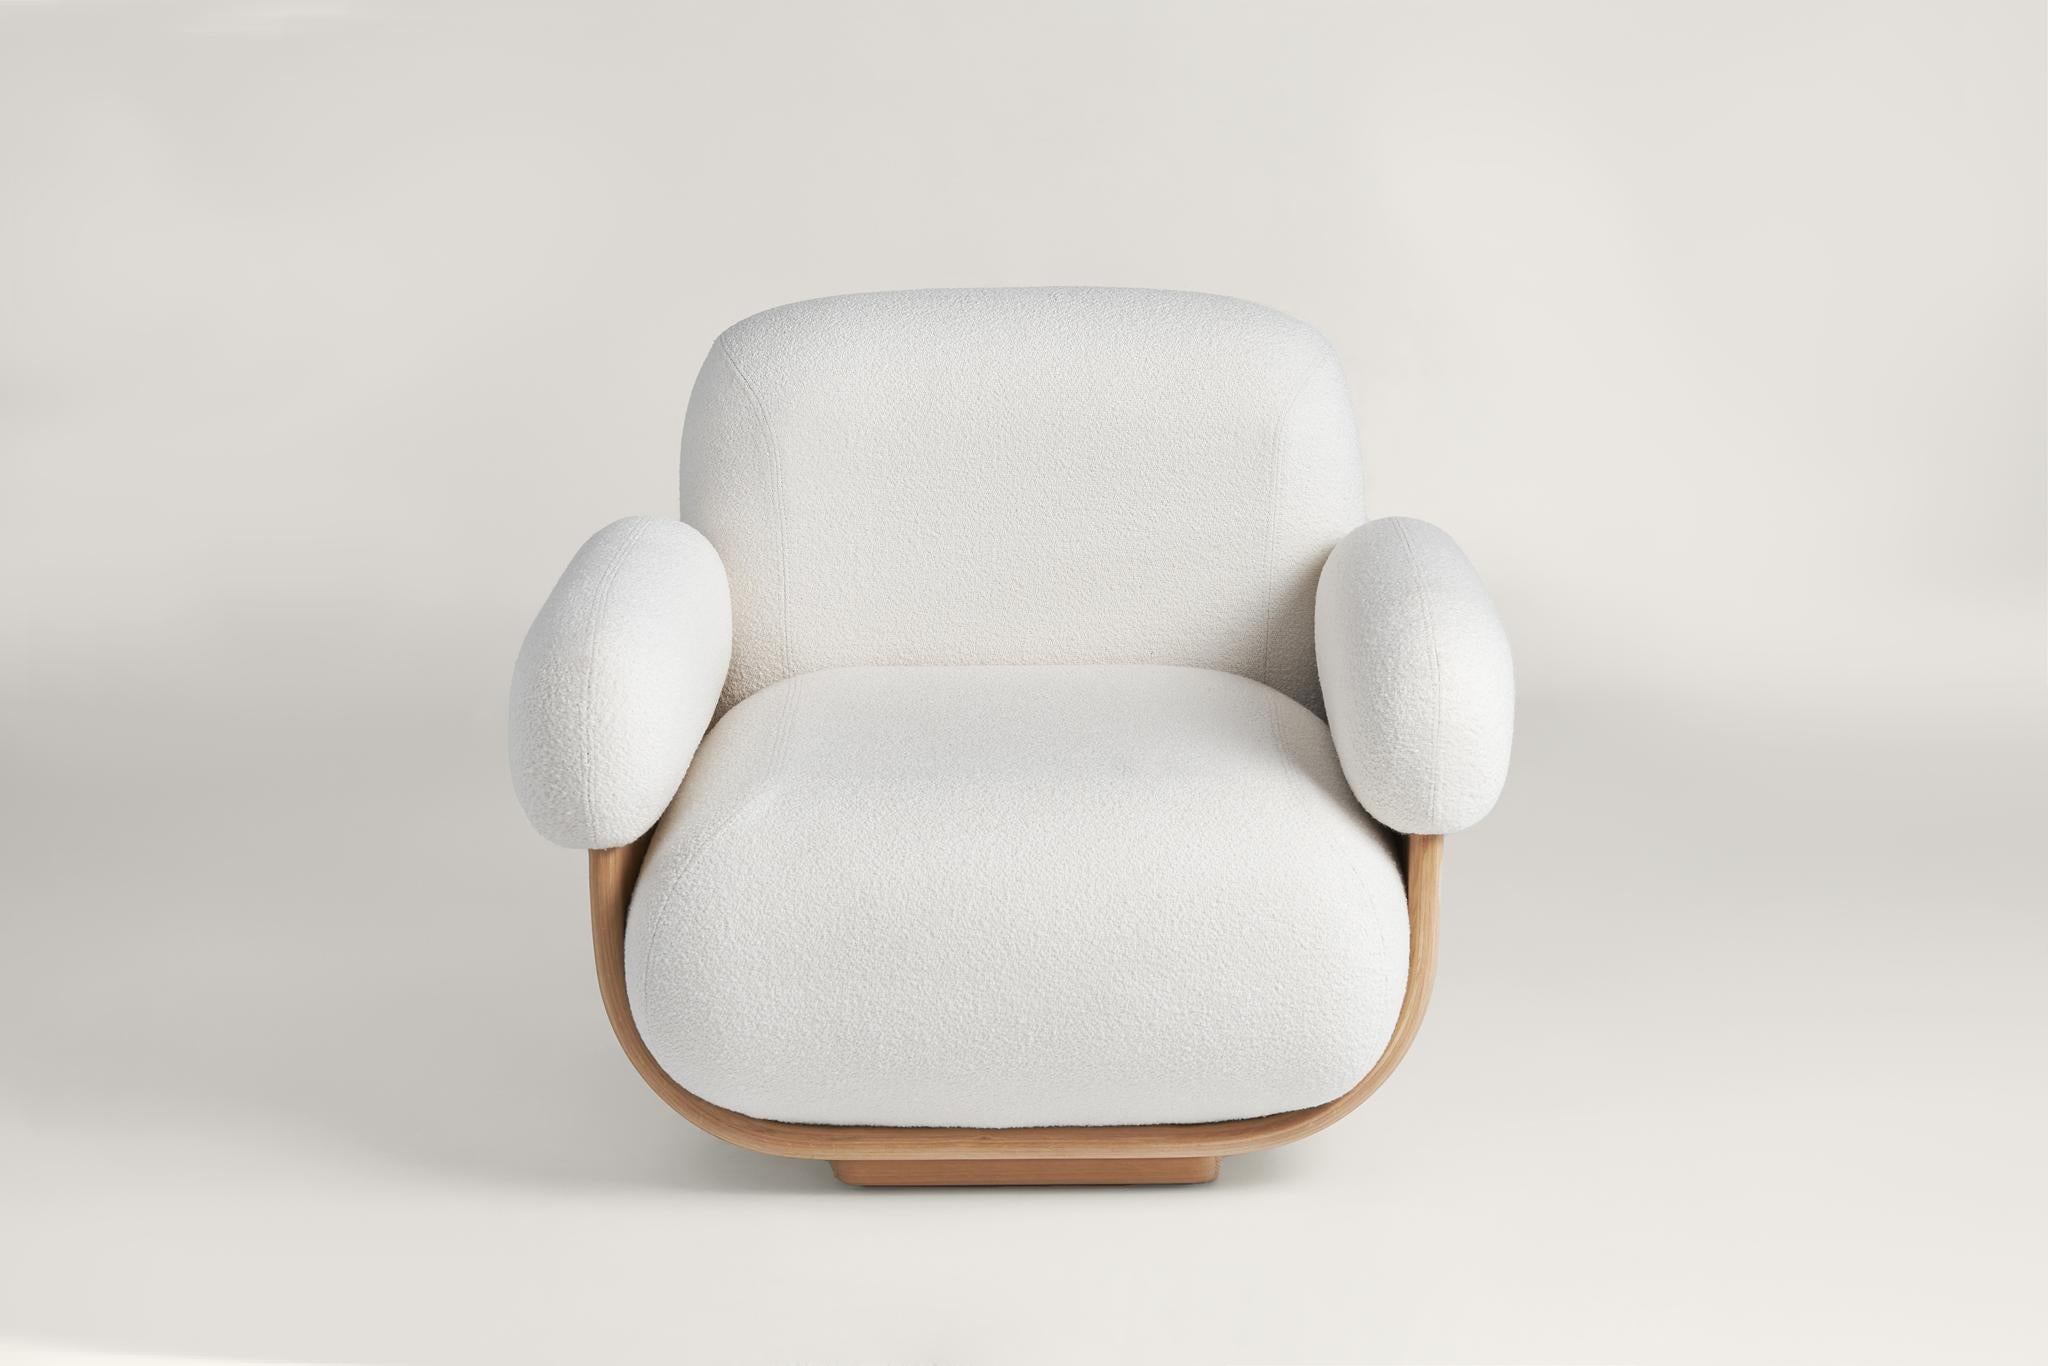 The chair's backrest is angled perfectly for ergonomic support, while the armrests provide a comfortable place to rest your arms making the Cannoli lounge chair a perfect spot to curl up with a good book or enjoy a relaxing afternoon nap.
 
Its